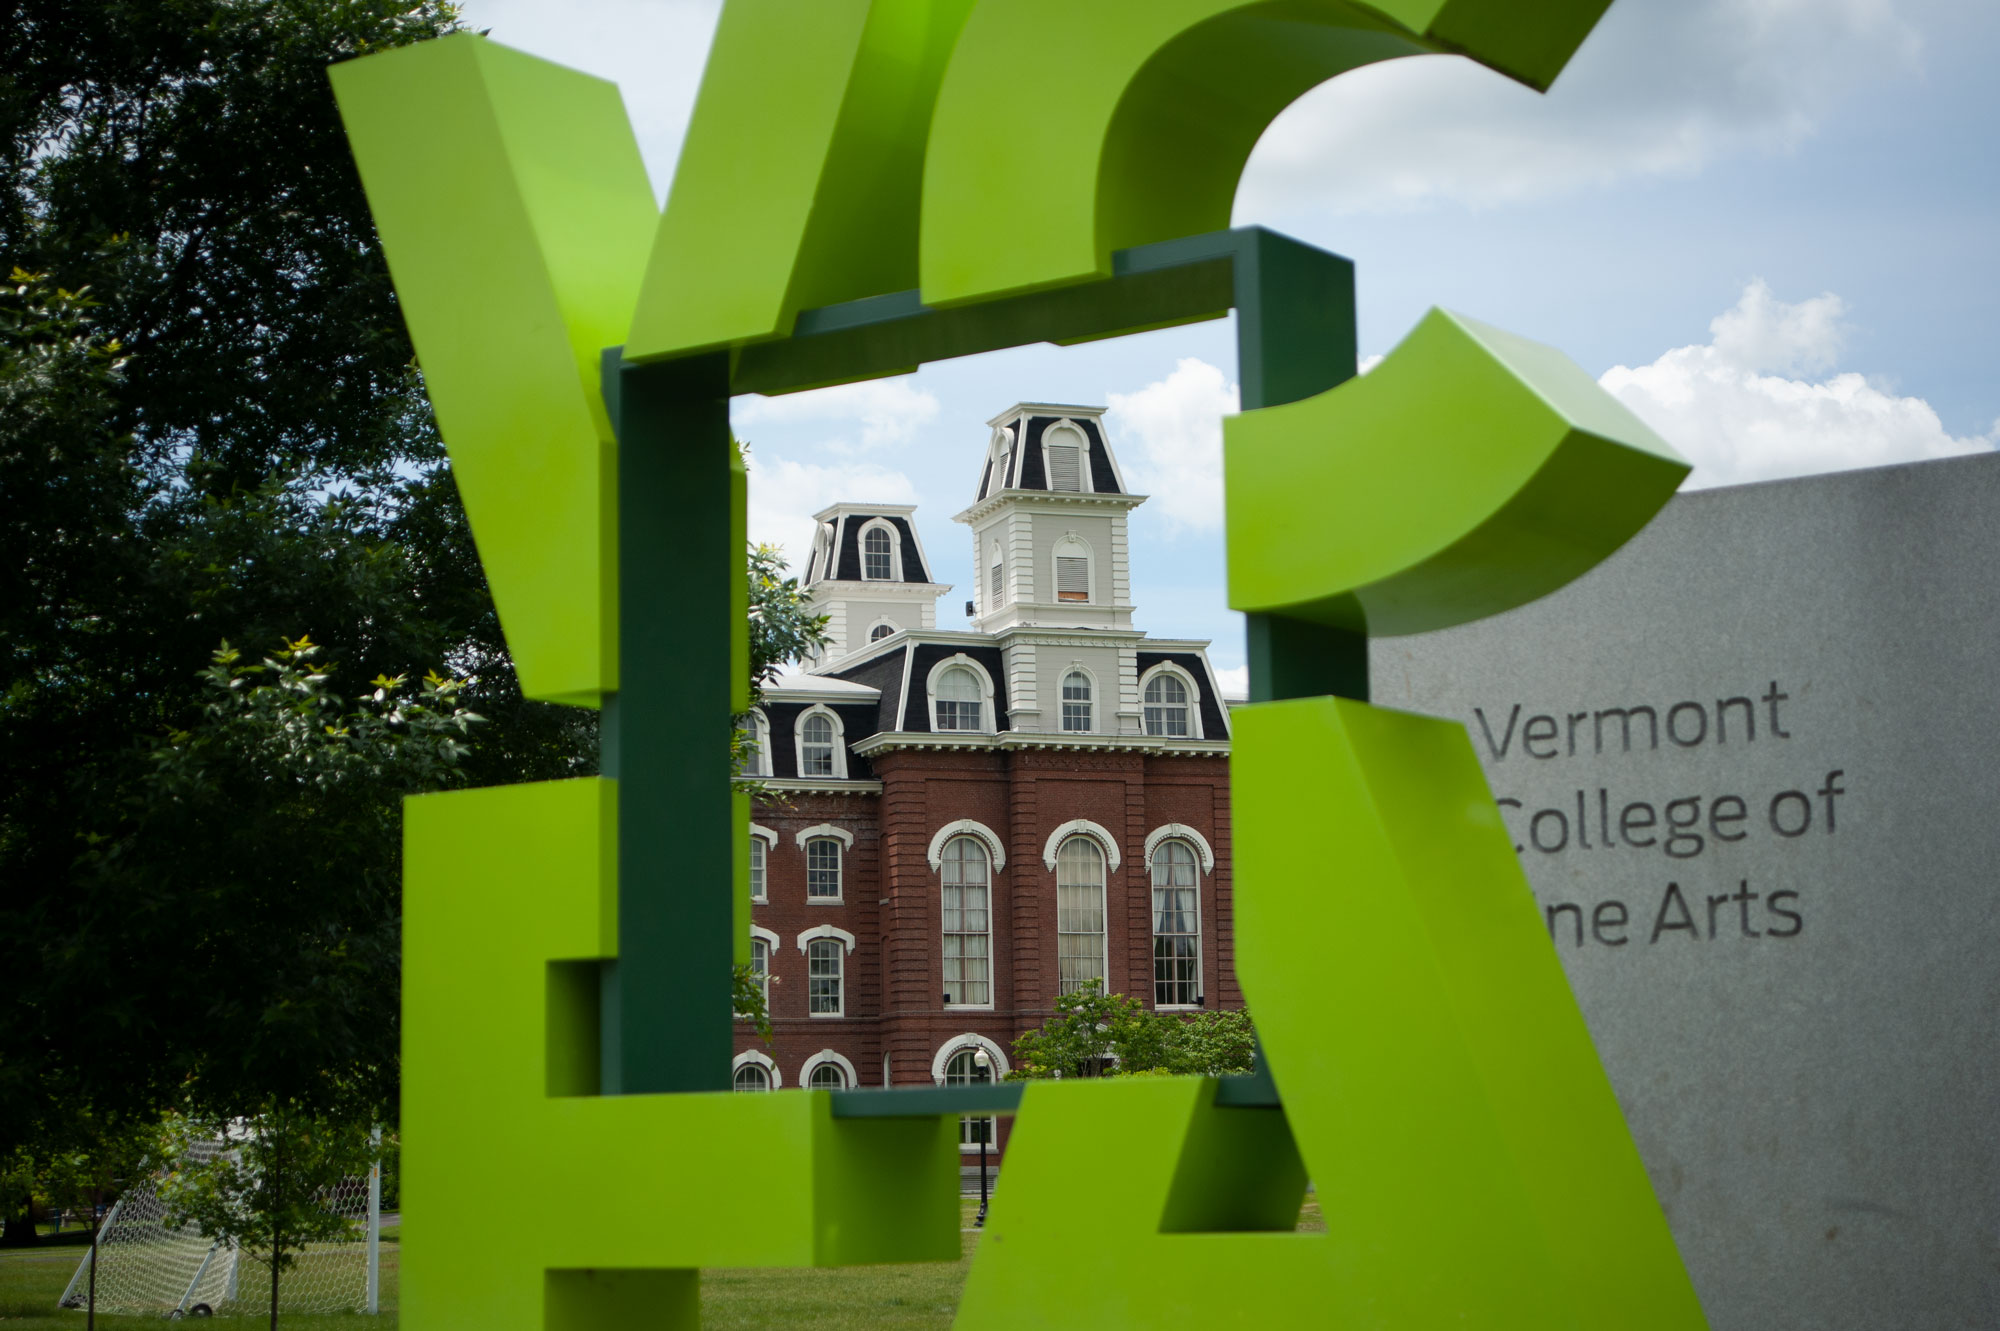 Alumni voice ‘profound disappointment’ in Vermont College of Fine Arts’ plan to end residencies, explore selling buildings - vtdigger.org